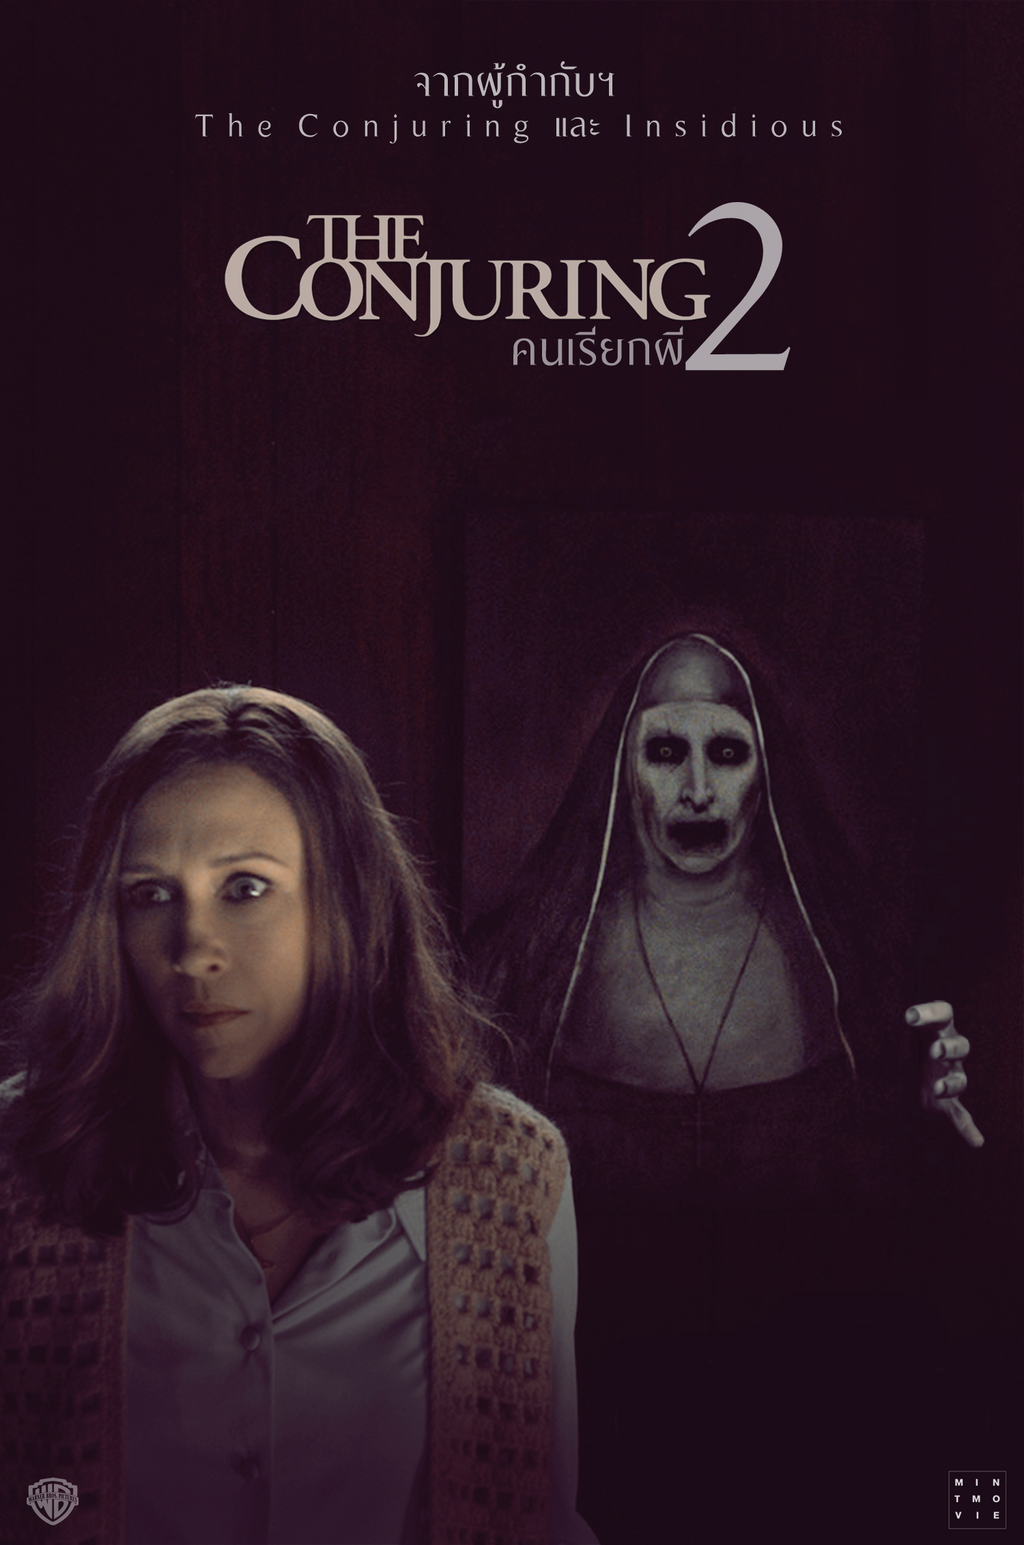 The Conjuring 2 (English) Hindi Dubbed Free Download